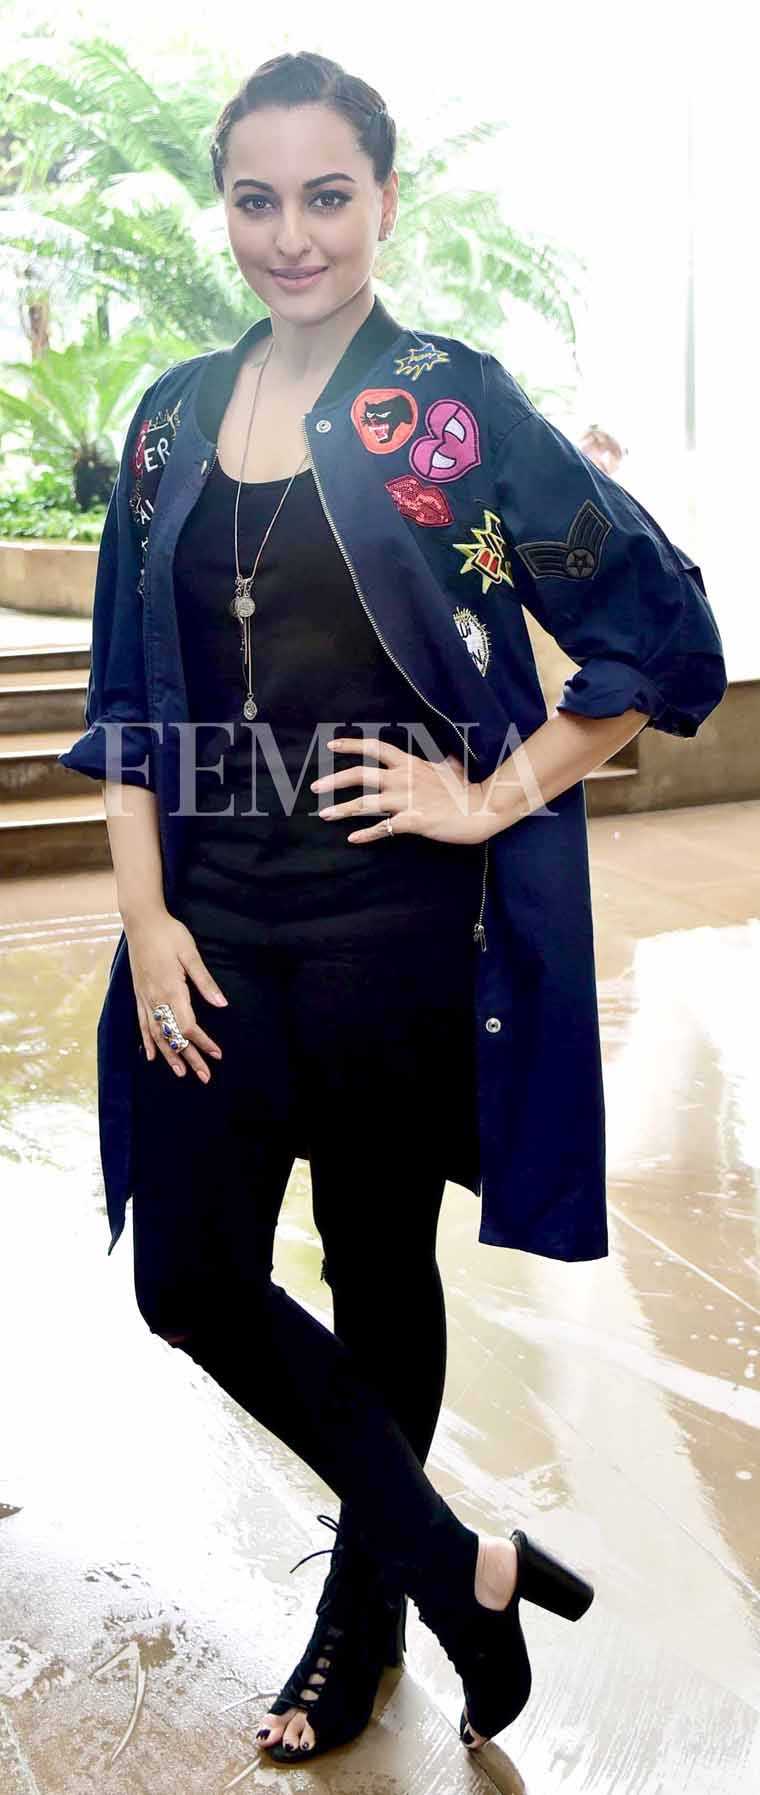 Sonakshi Sinha gave a badass spin to her all-black denims-and tee-combo with an oversized jacket from Madison. She added a pair of caged heels and braids to the mix.